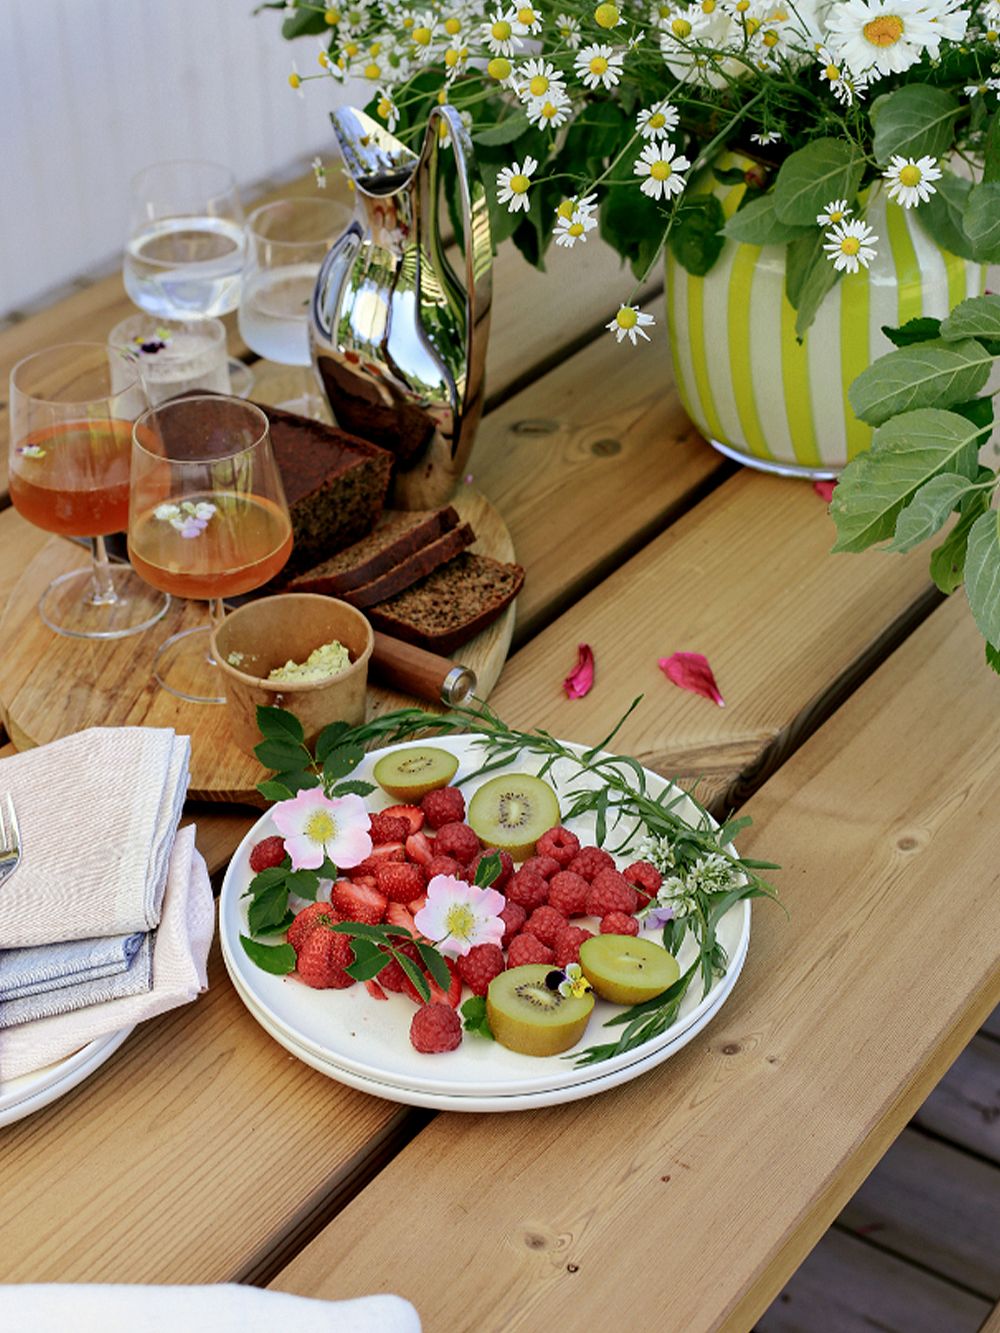 An image of a summery table setting, as part of the summer cabin decor.